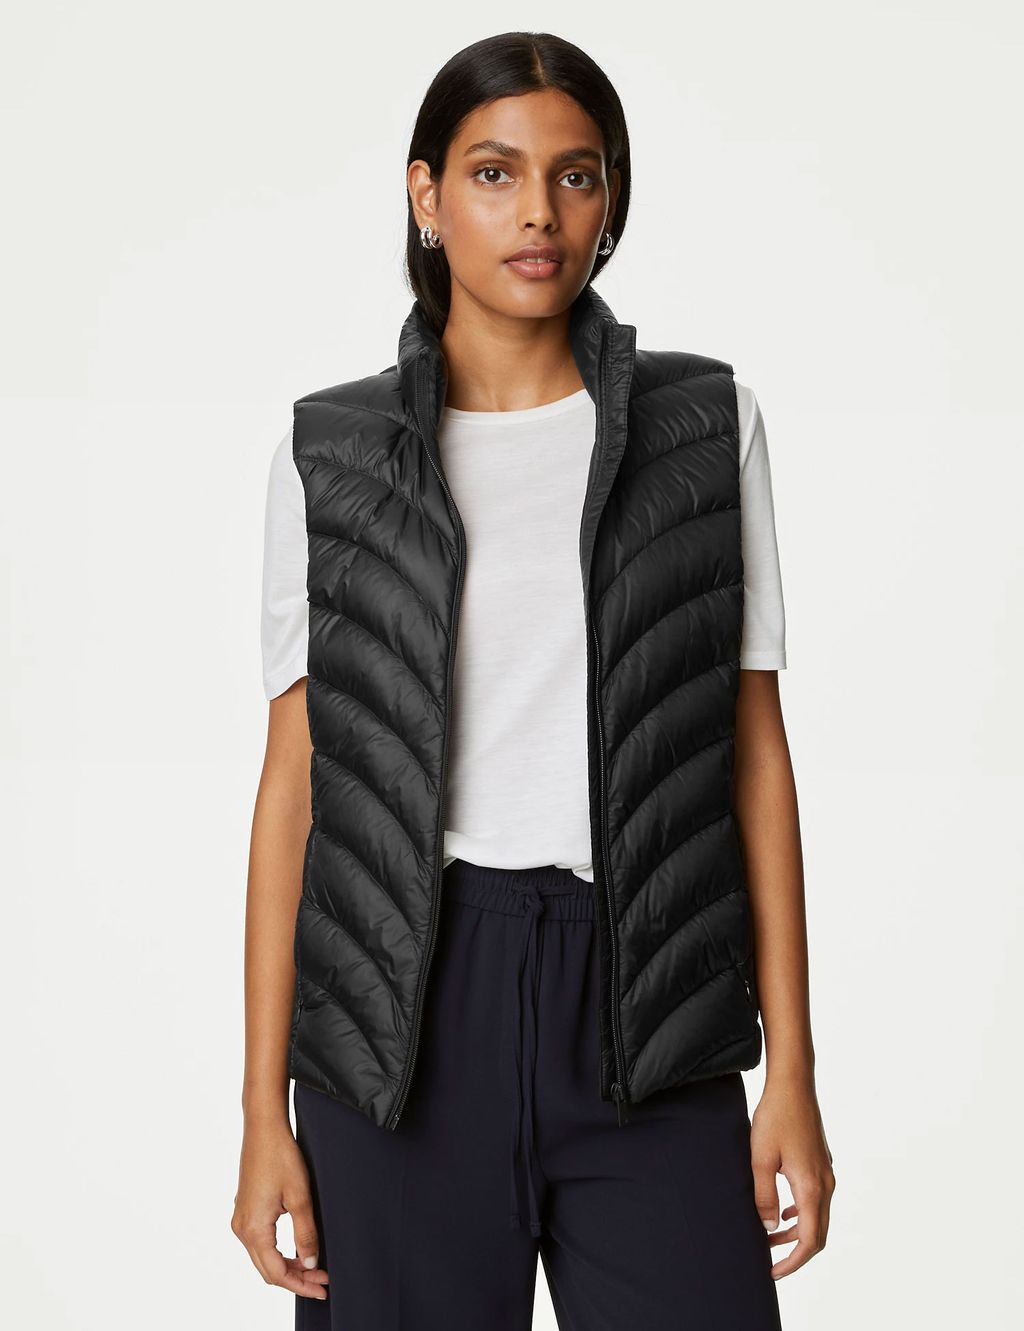 9 best gilets for women 2023: From M&S padded gilet to Zara’s faux fur ...